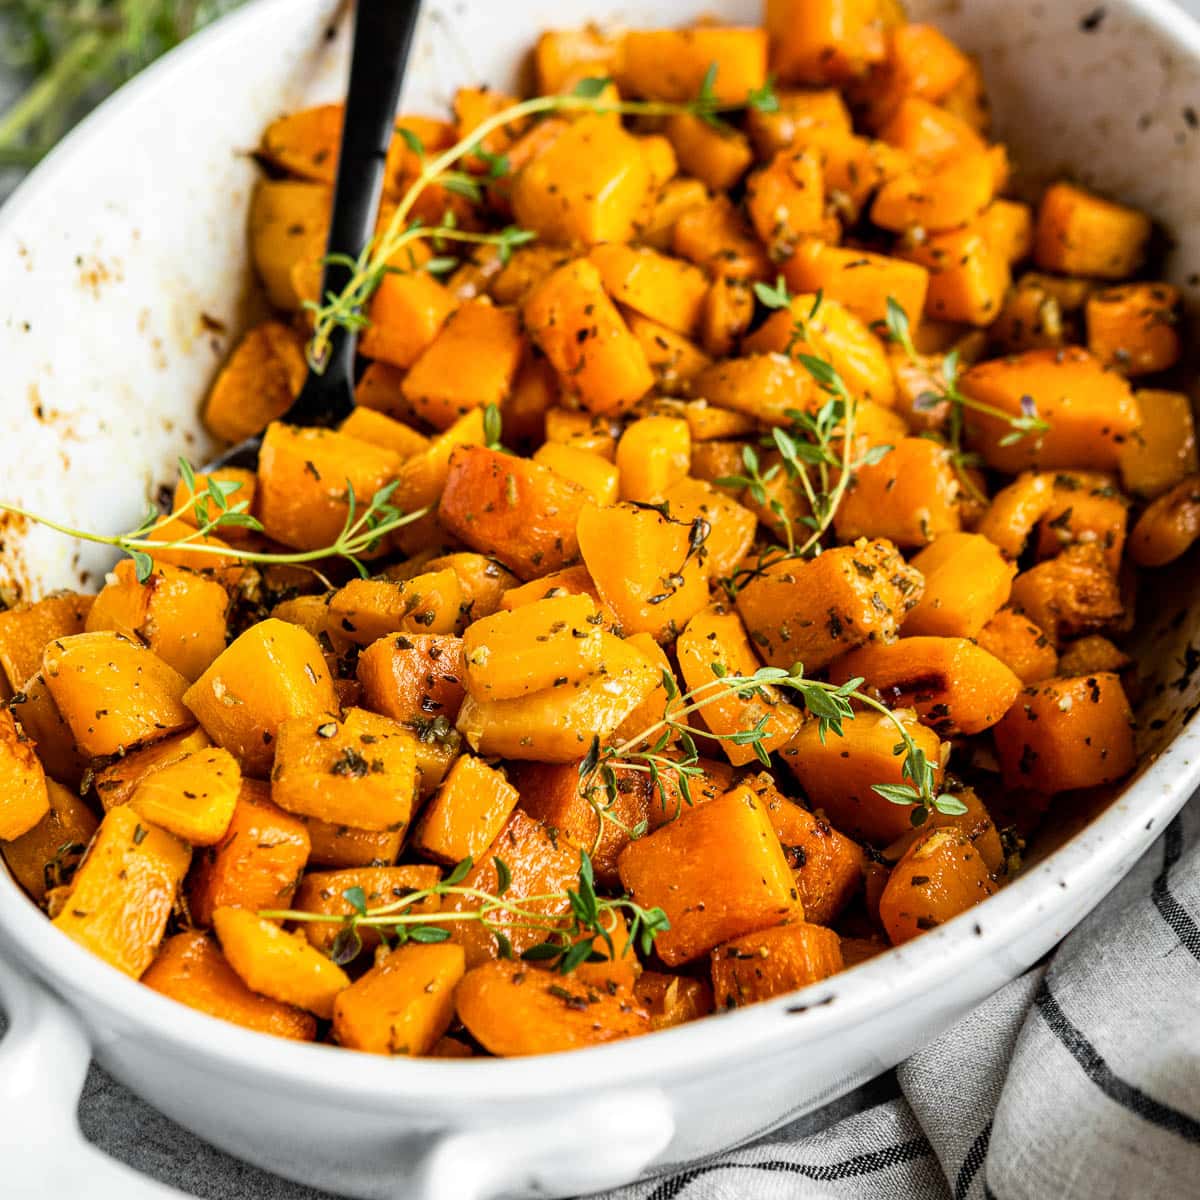 ceramic dish of roasted butternut squash topped with fresh herbs